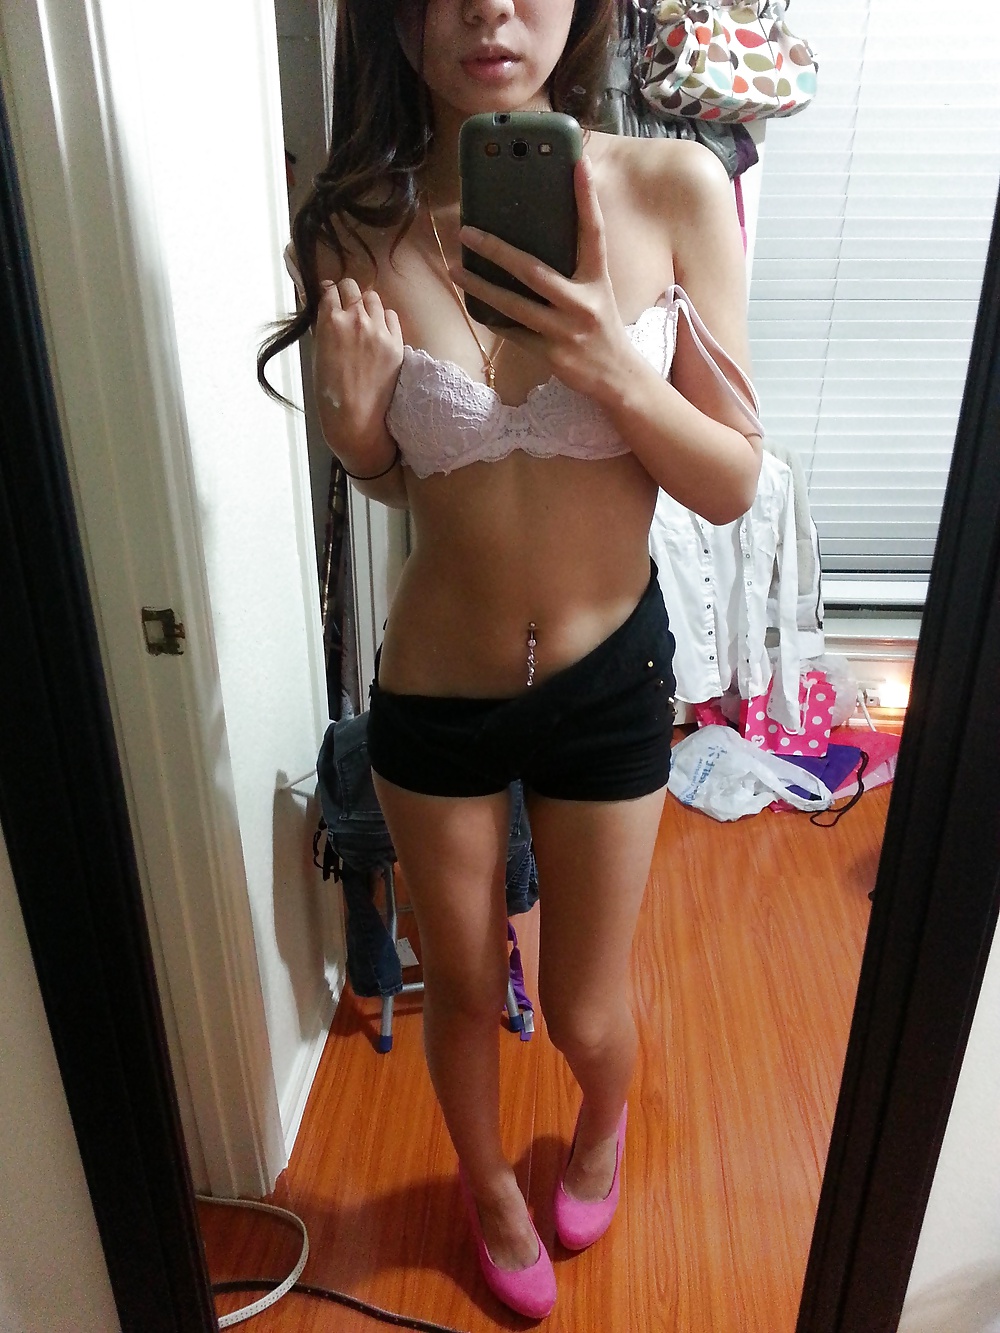 Free Amateurs Asian Delights 22 - Cute selfshooter photos